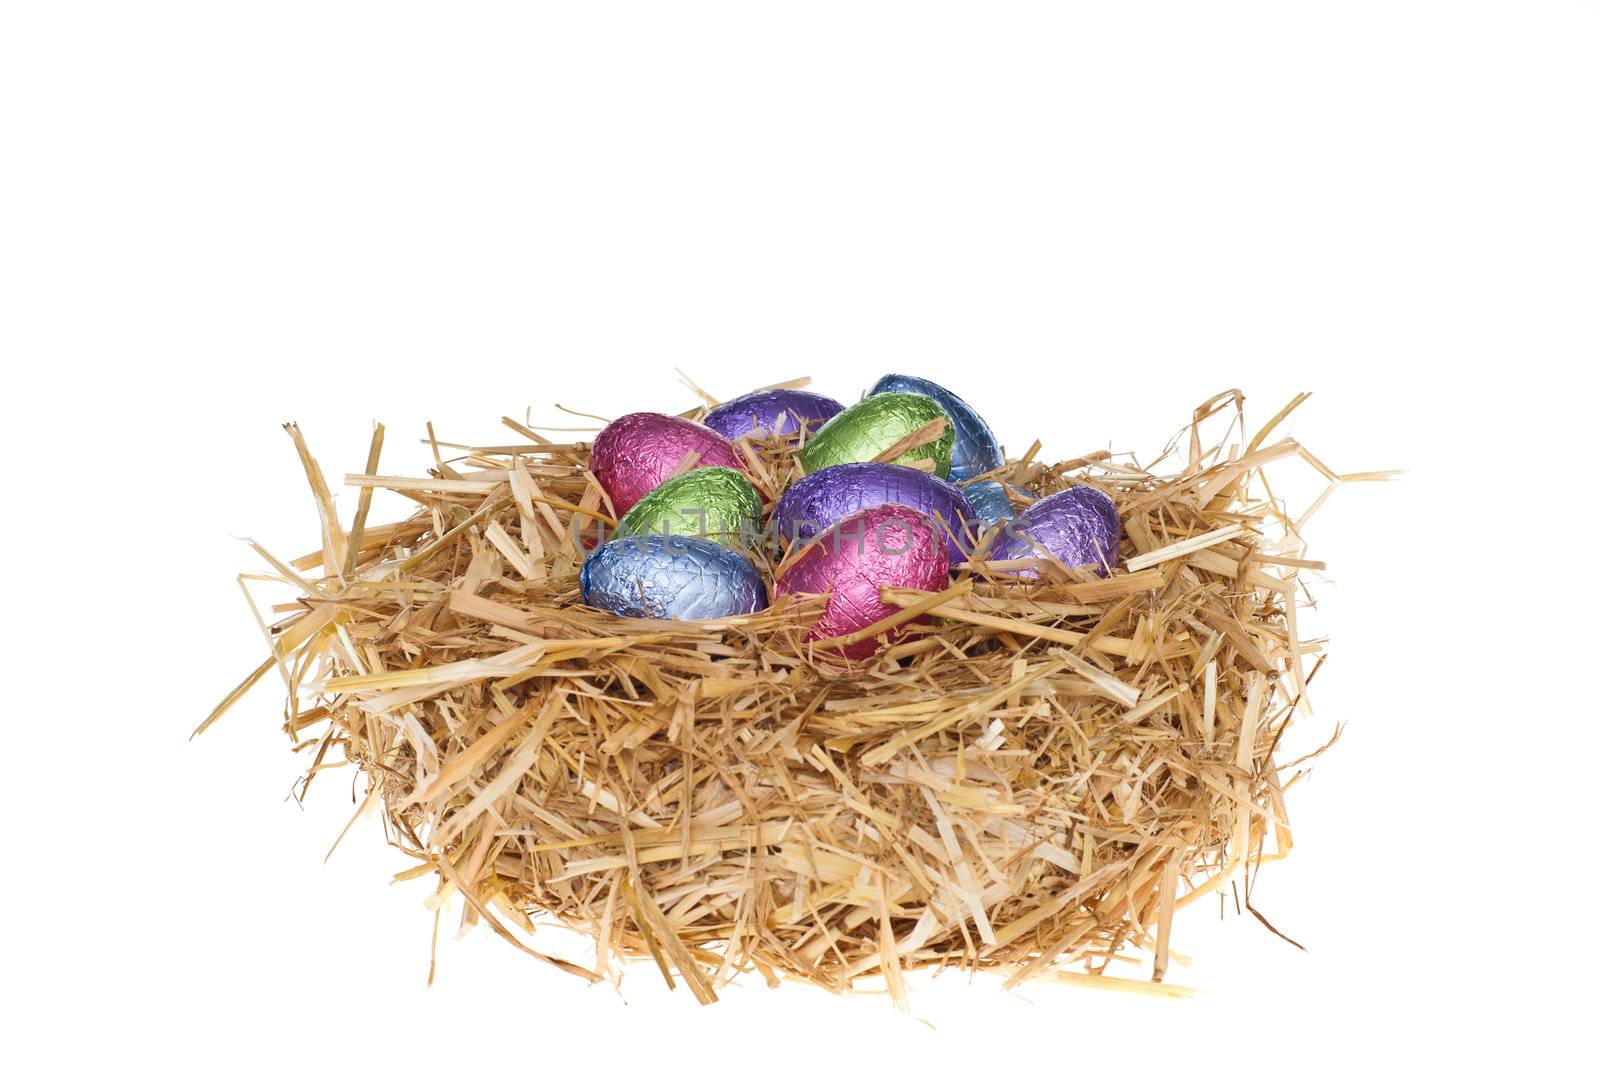 Straw nest with chocolate Easter eggs over white studio shoot